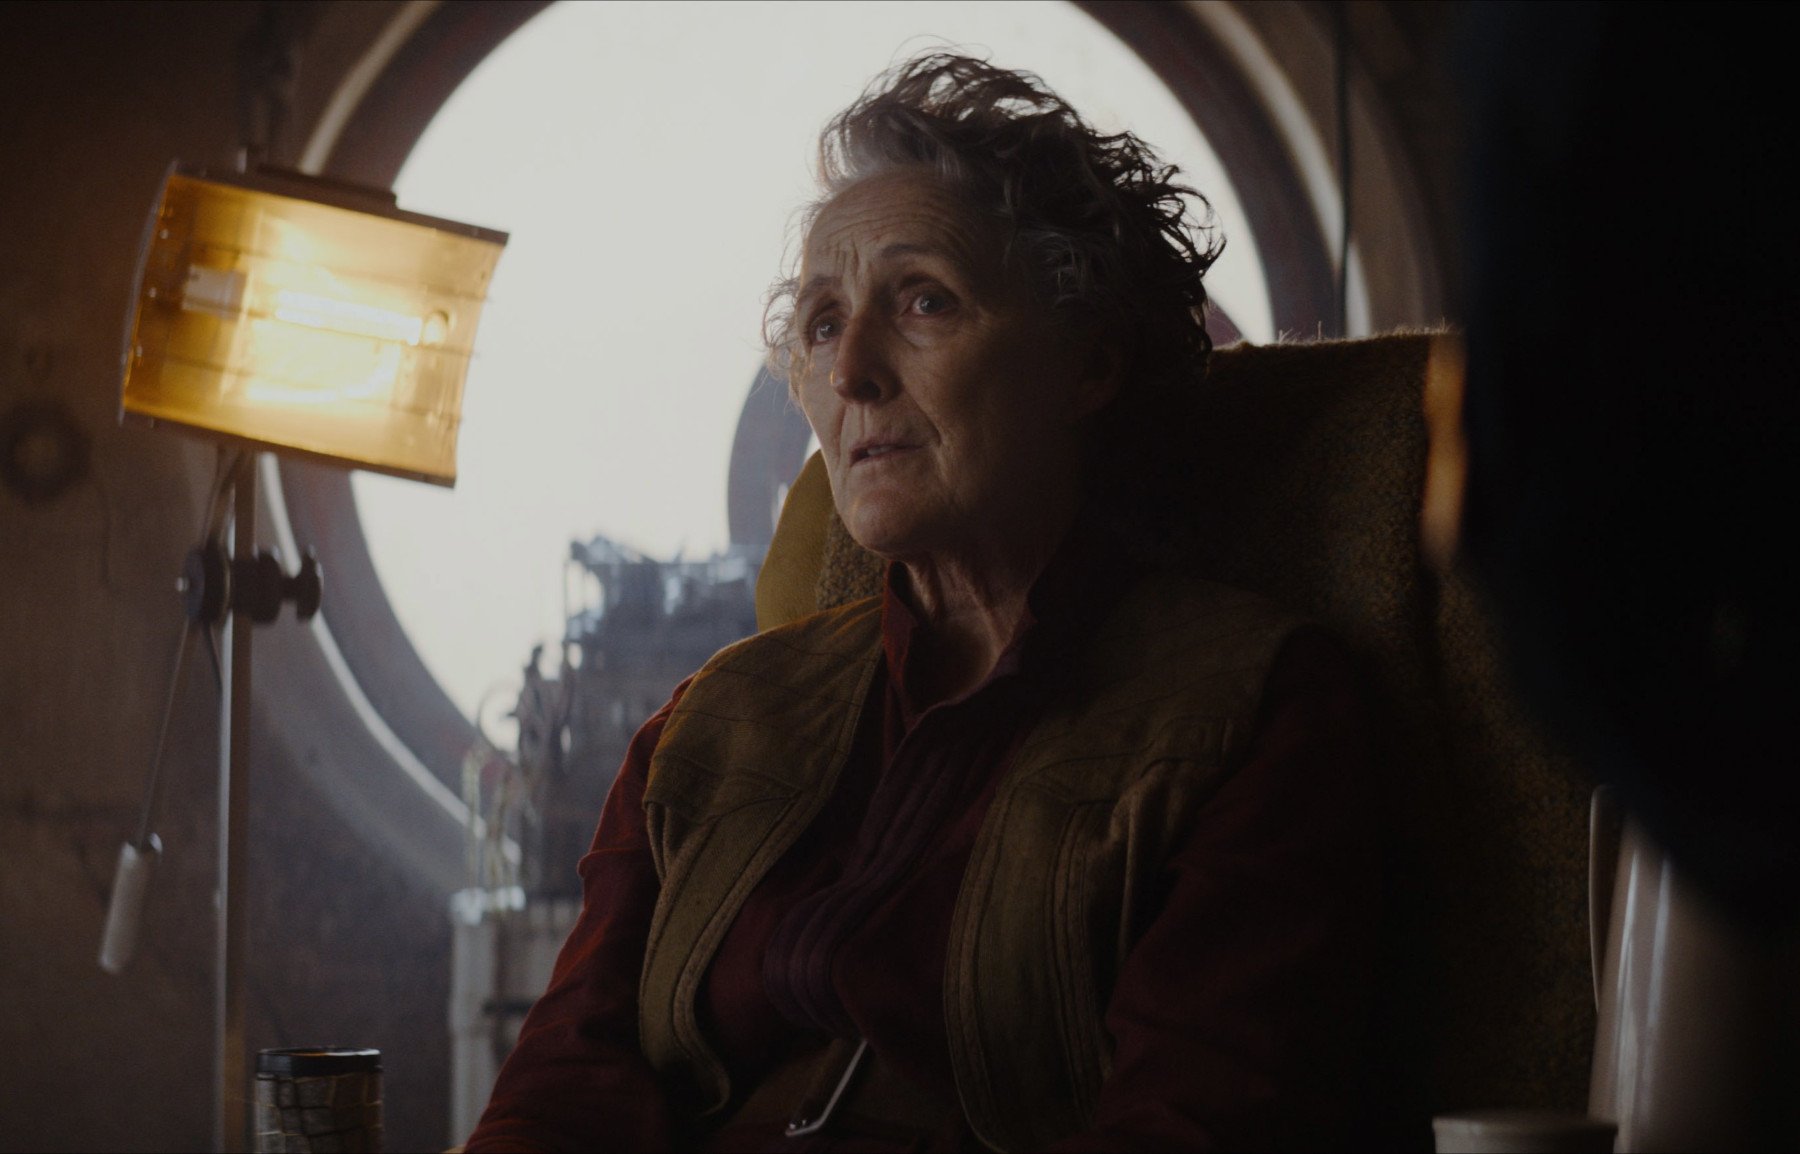 Fiona Shaw as Maarva during the ending of 'Andor' Episode 3. She's sitting in a chair, and there's a circular window behind her.